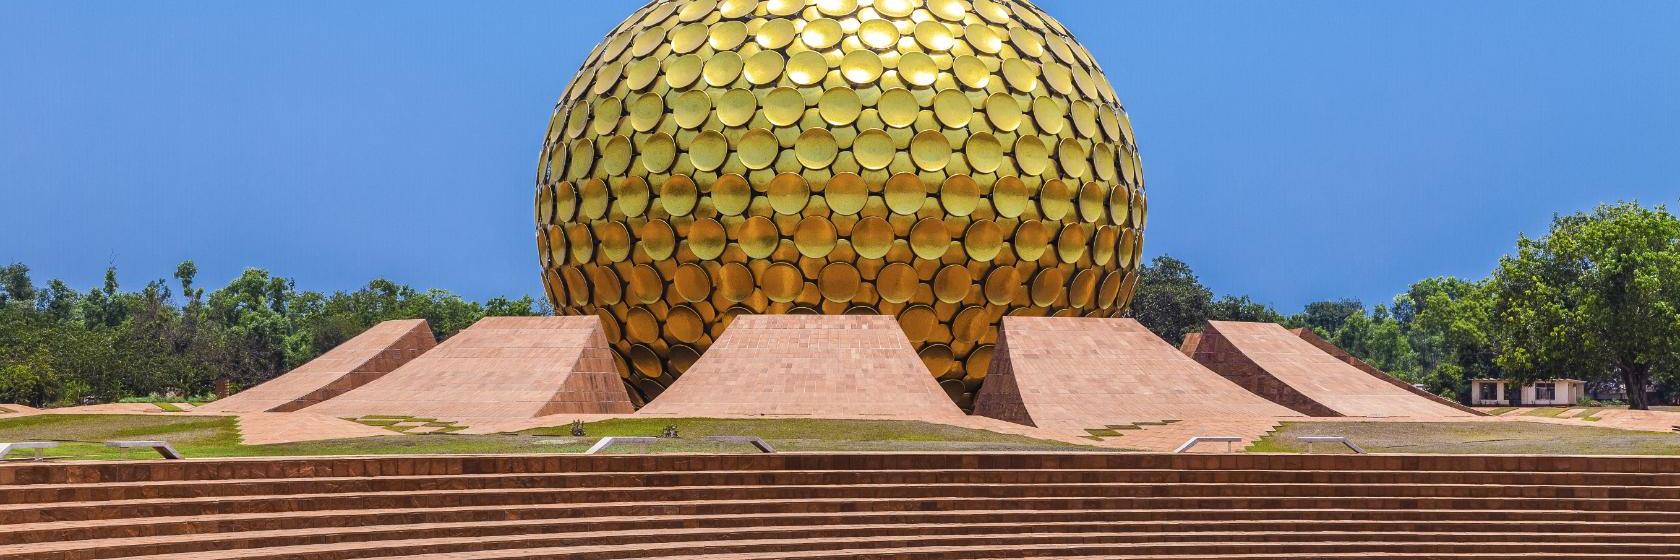 10 Best Auroville Hotels, India (From $9)